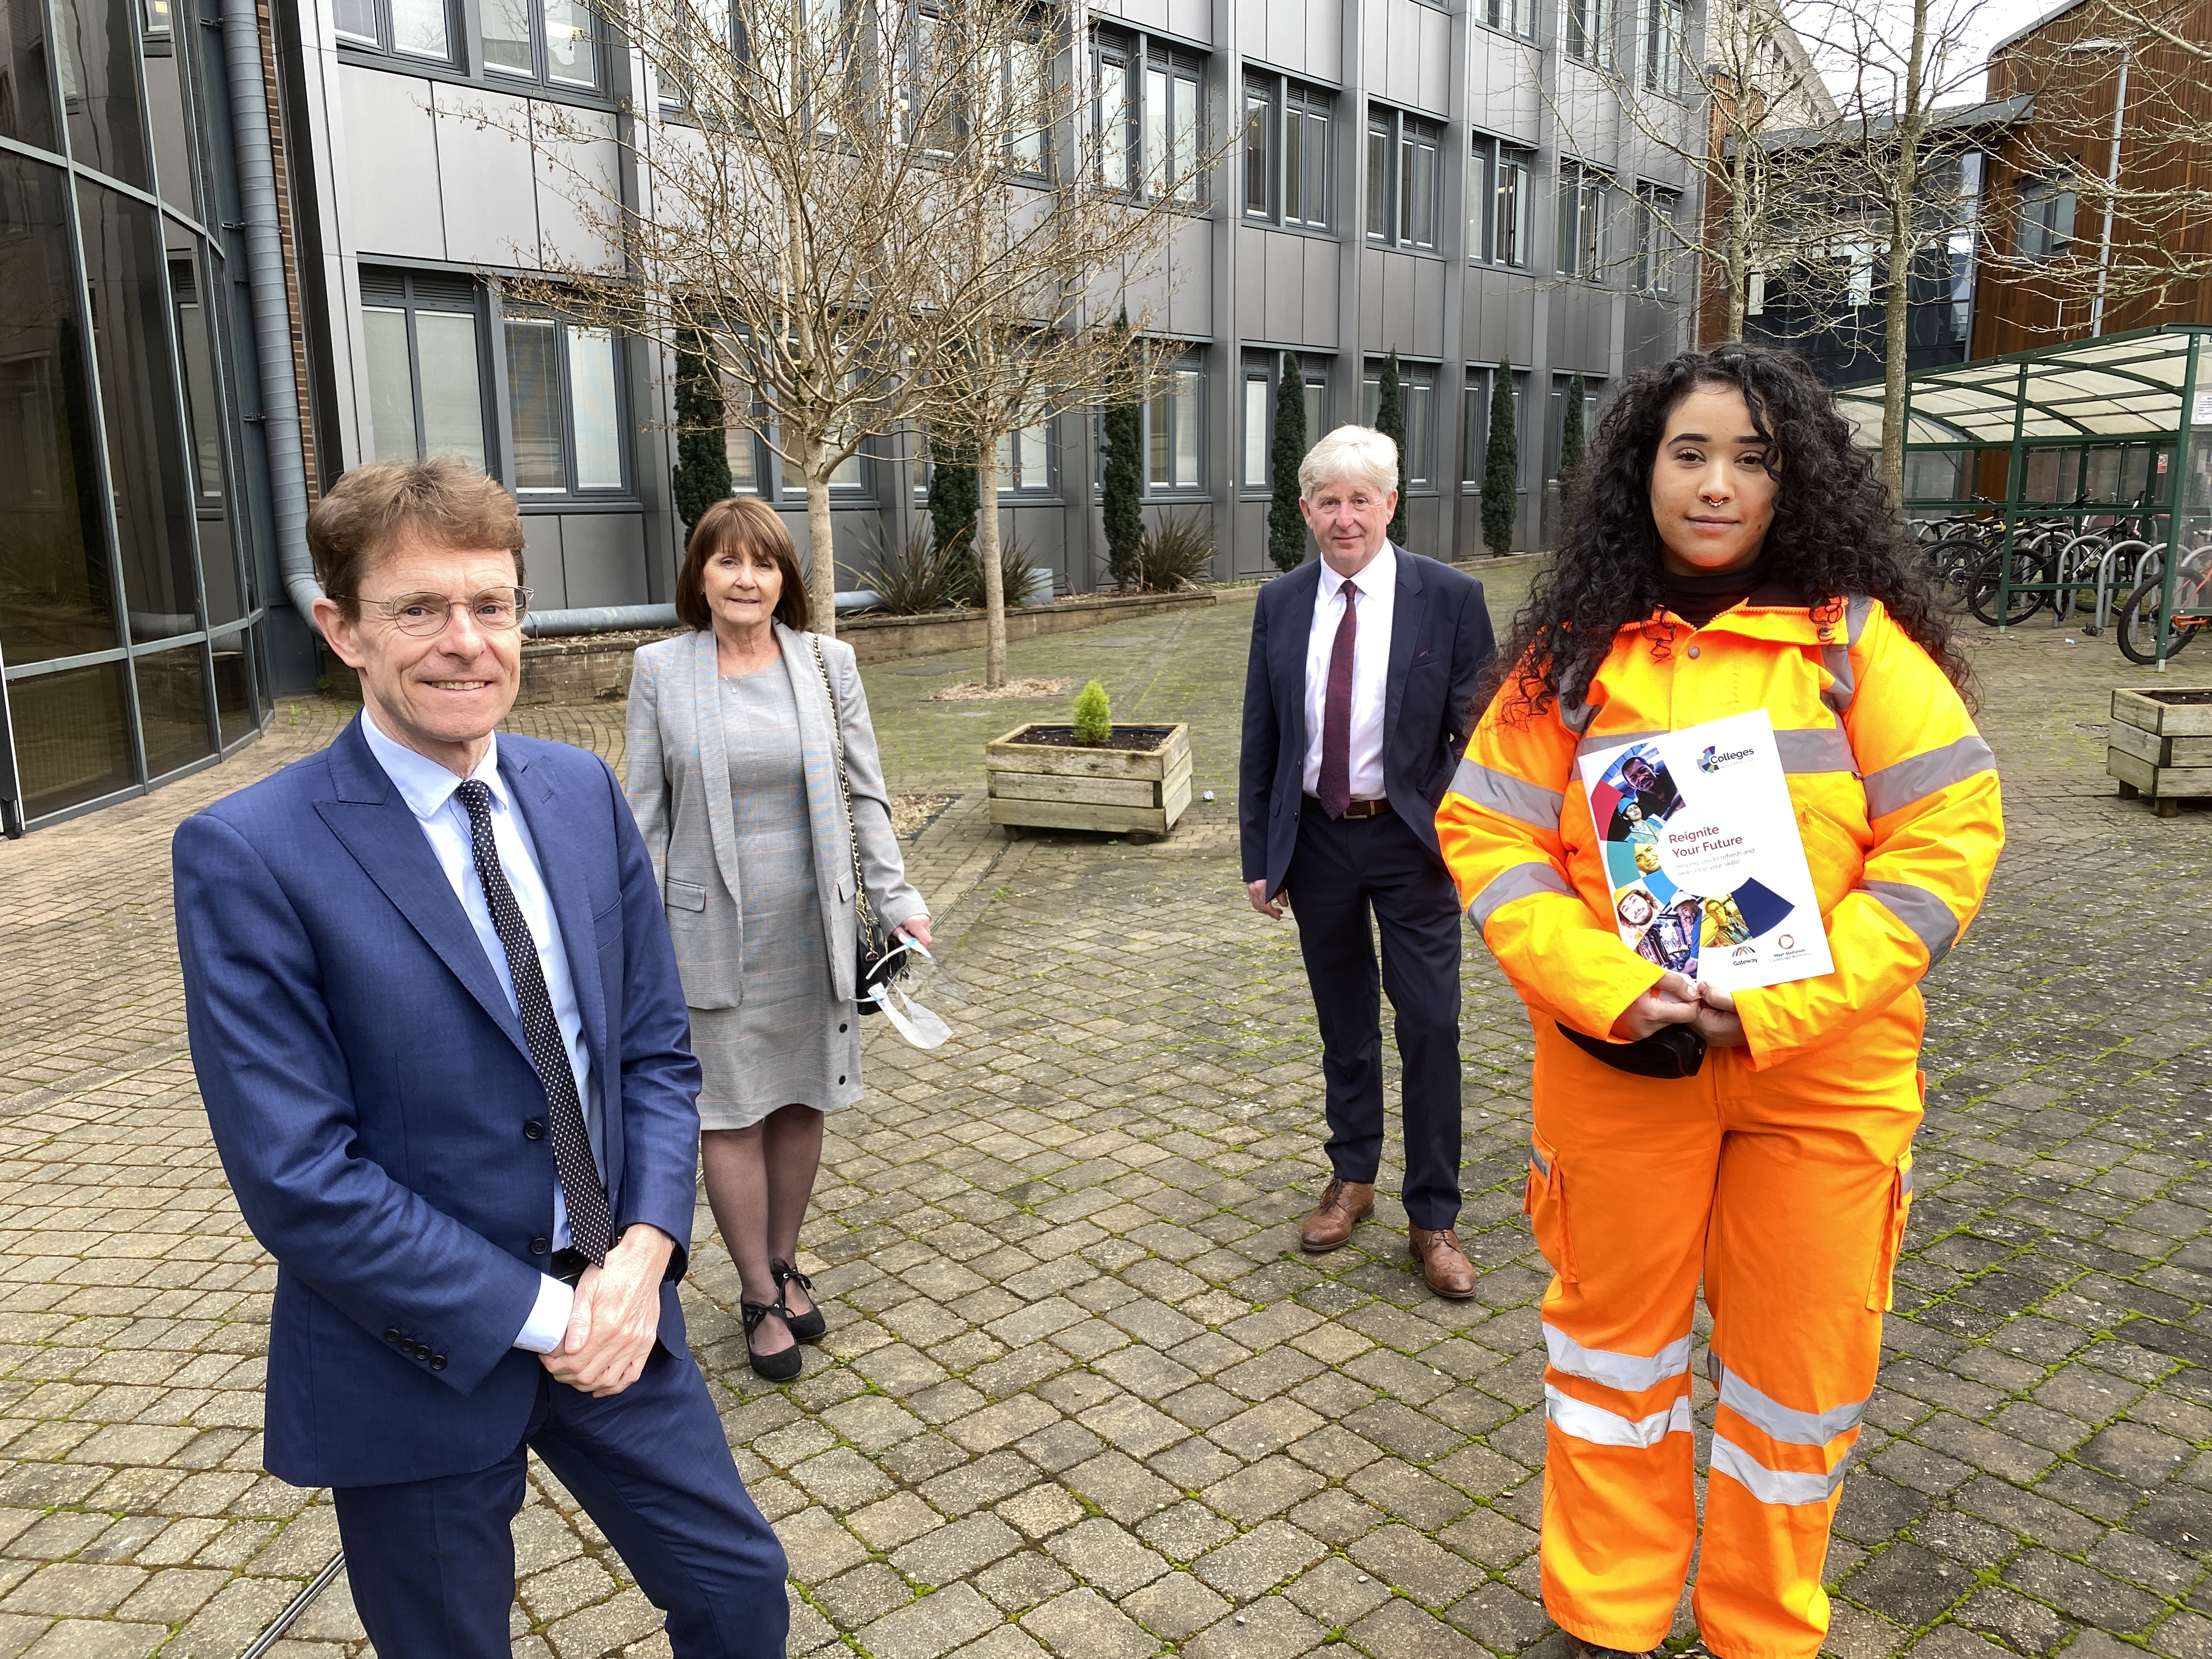 Pictured at the launch of ‘Reignite Your Future’ are L-R  Andy Street, Mayor of the West Midlands, Rose Rees, head of engagement and skills at Midland Metro Alliance, Lowell Williams, Chair of Colleges West Midlands, and Iman Khan, who is on a construction training programme